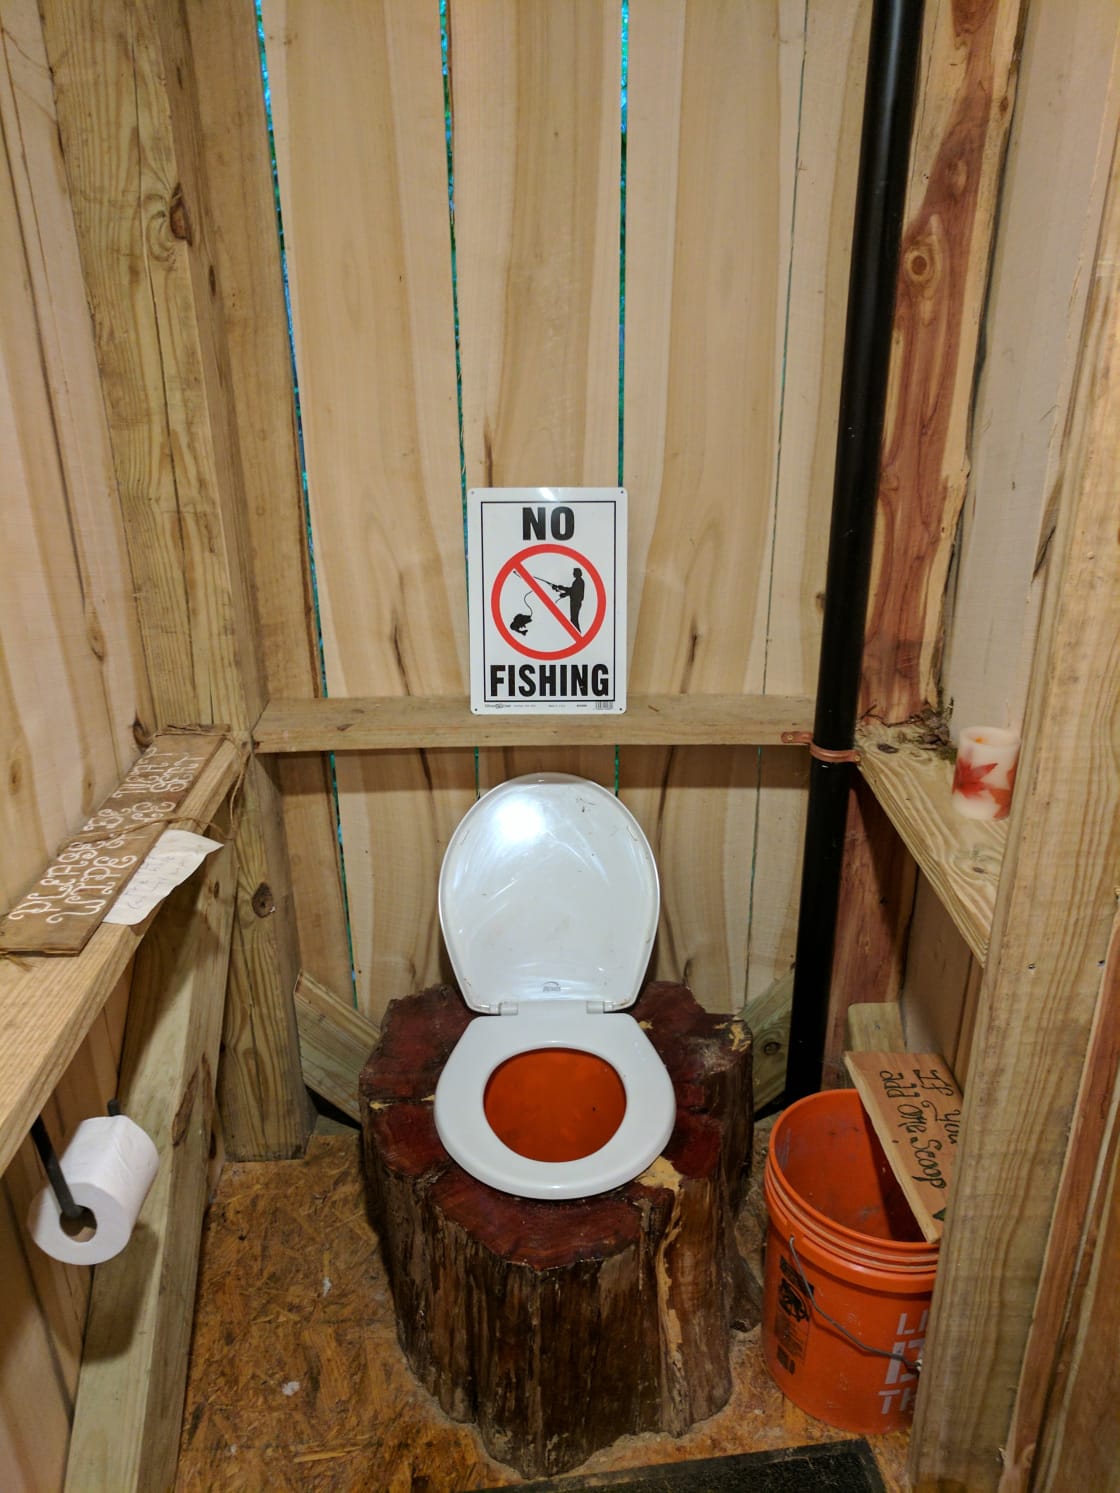 Business end of the outhouse. No fishing